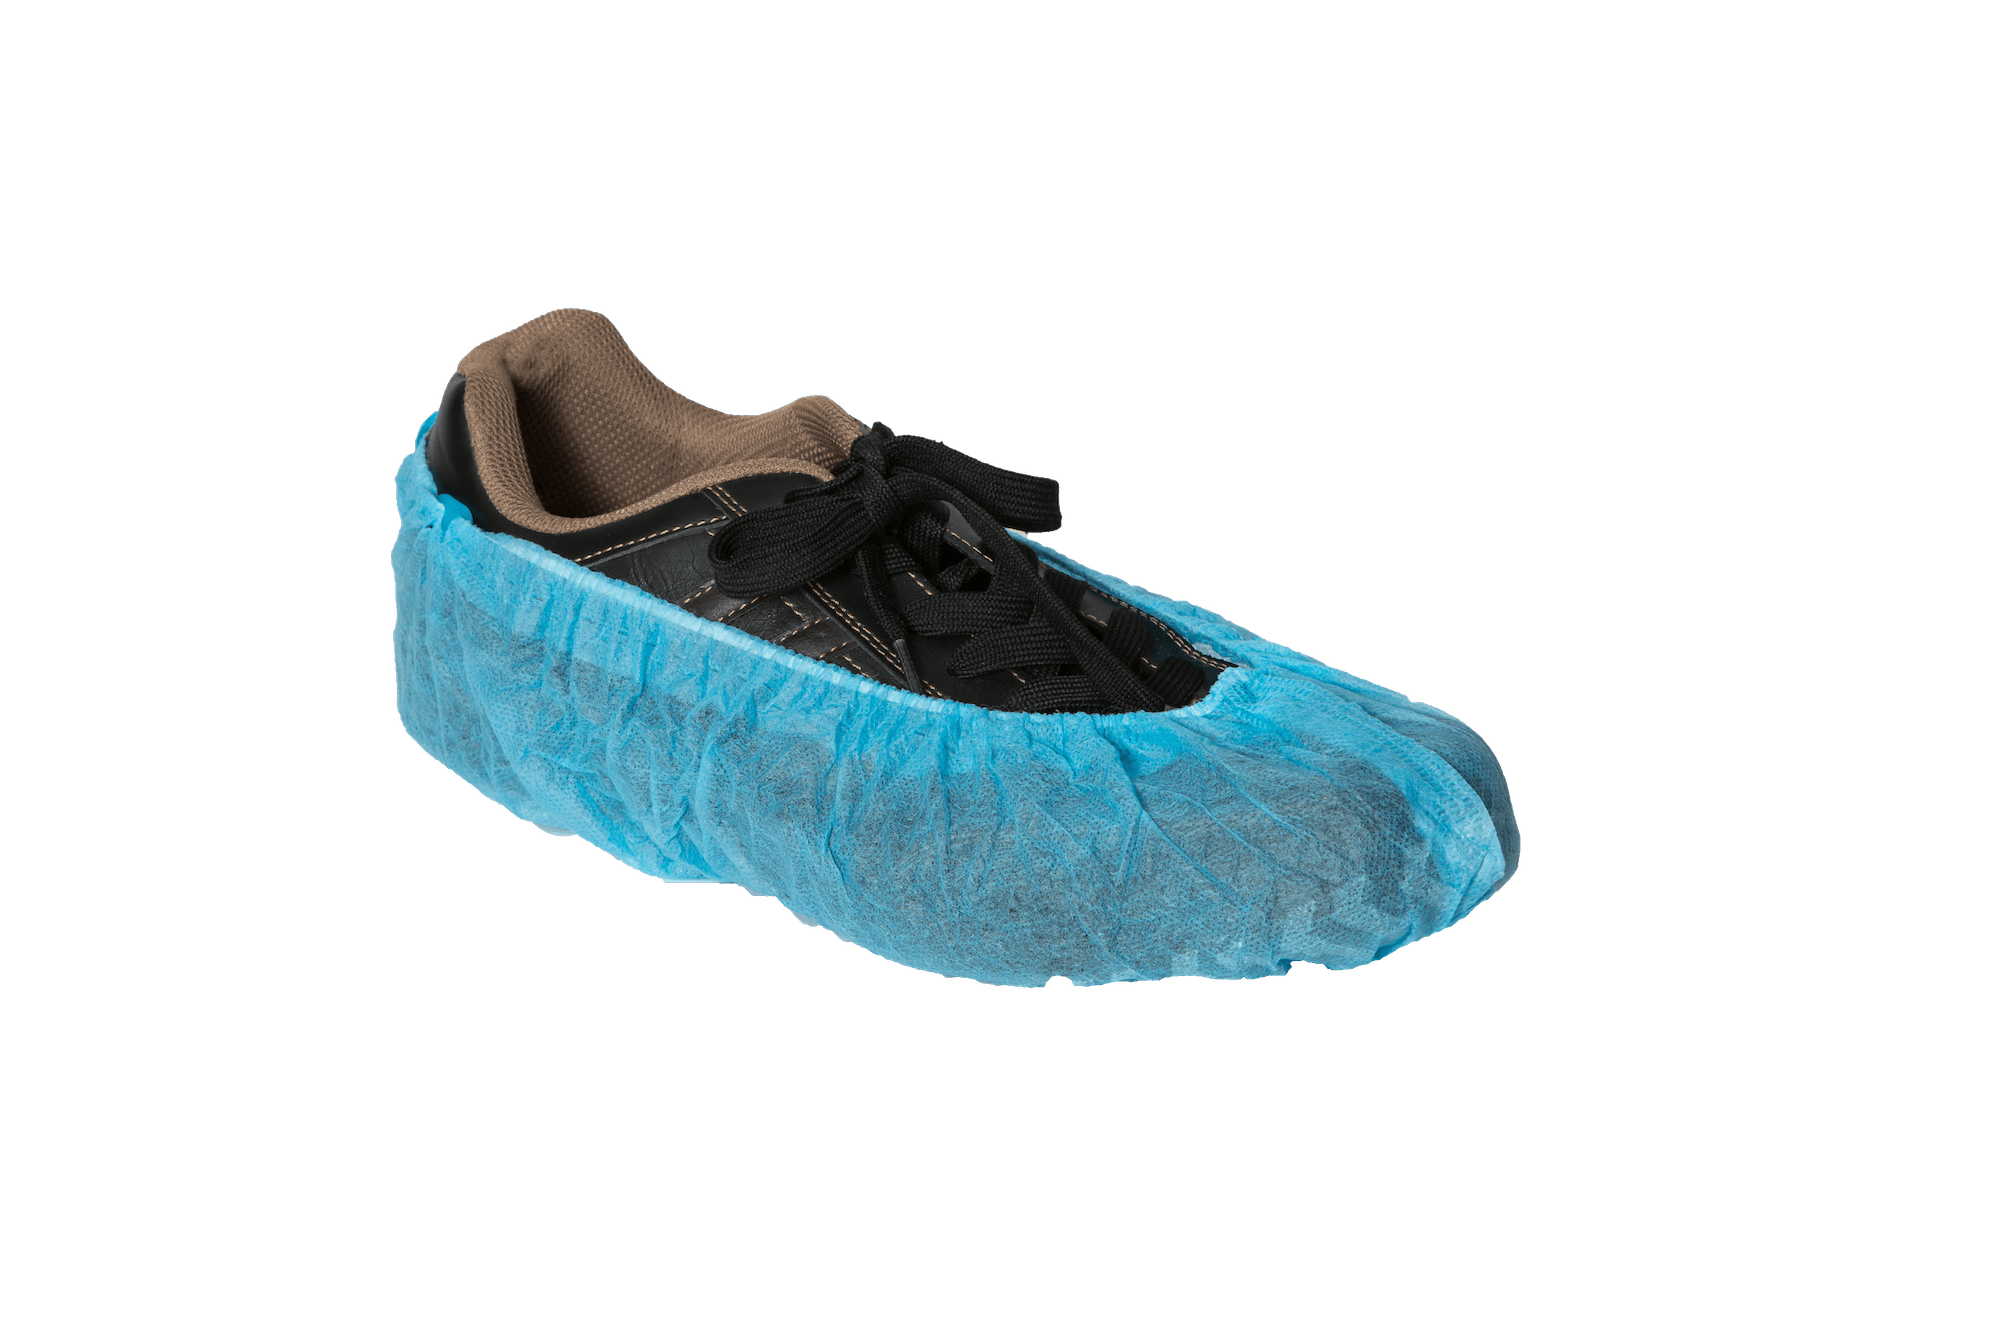 Shoe Covers Online Store in Alberta and British Columbia